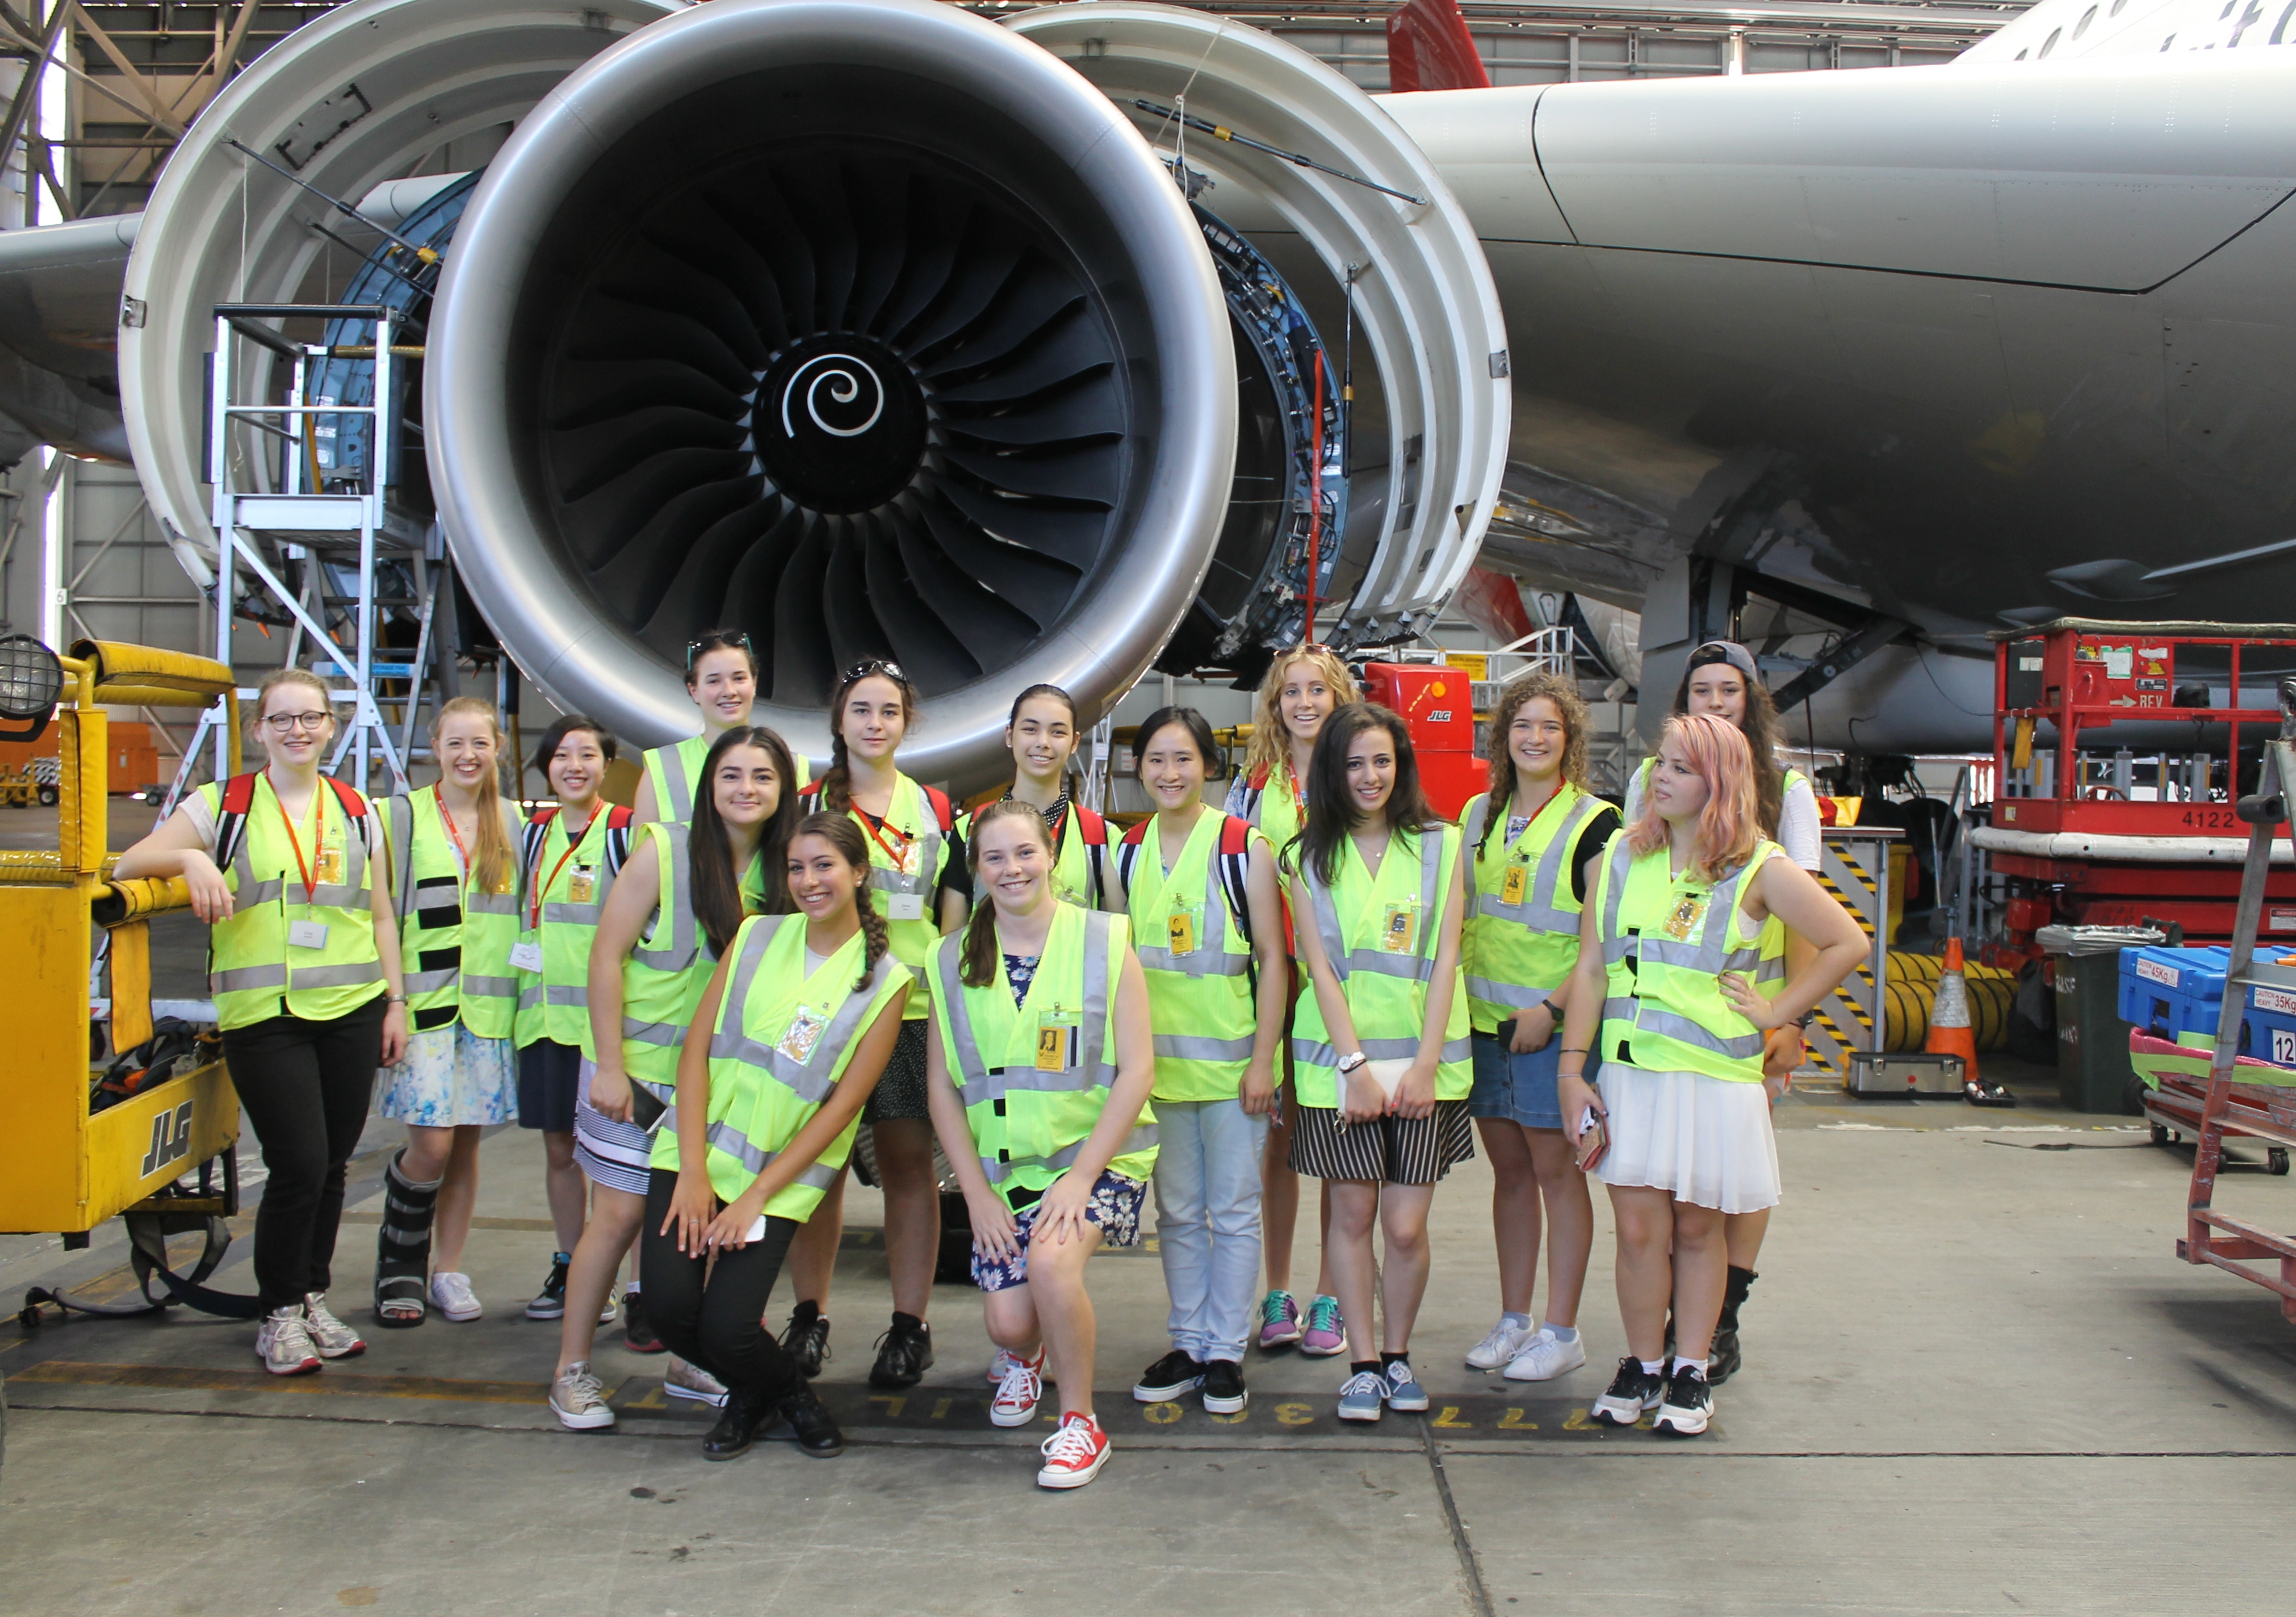 Students of the UNSW Women in Engineering Camp visit the Qantas Engineering and Maintenance facility in Sydney.